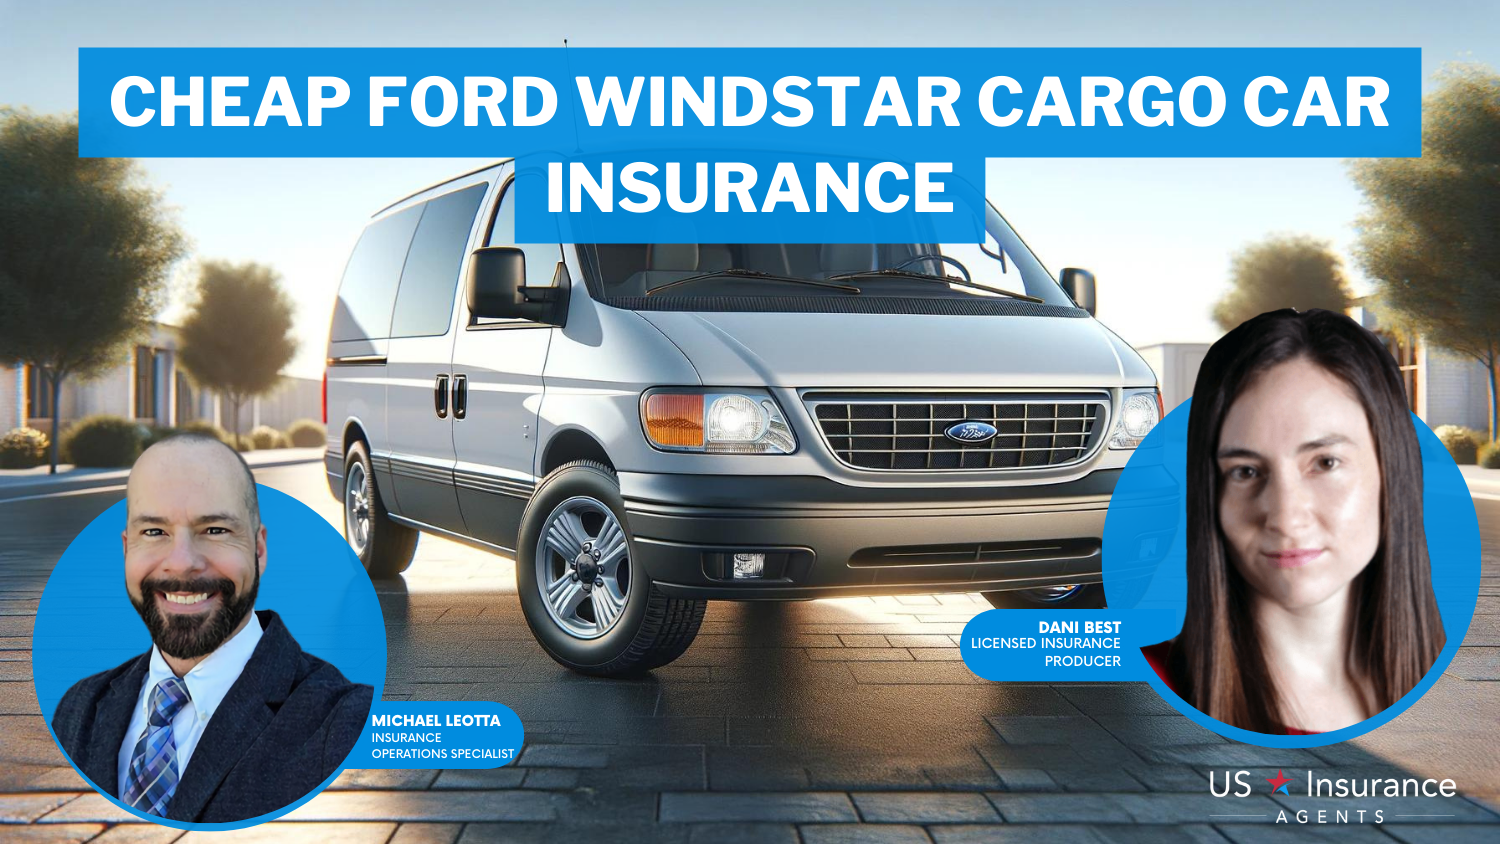 Auto-Owners, State Farm, and AAA: Cheap Ford Windstar Cargo Car Insurance